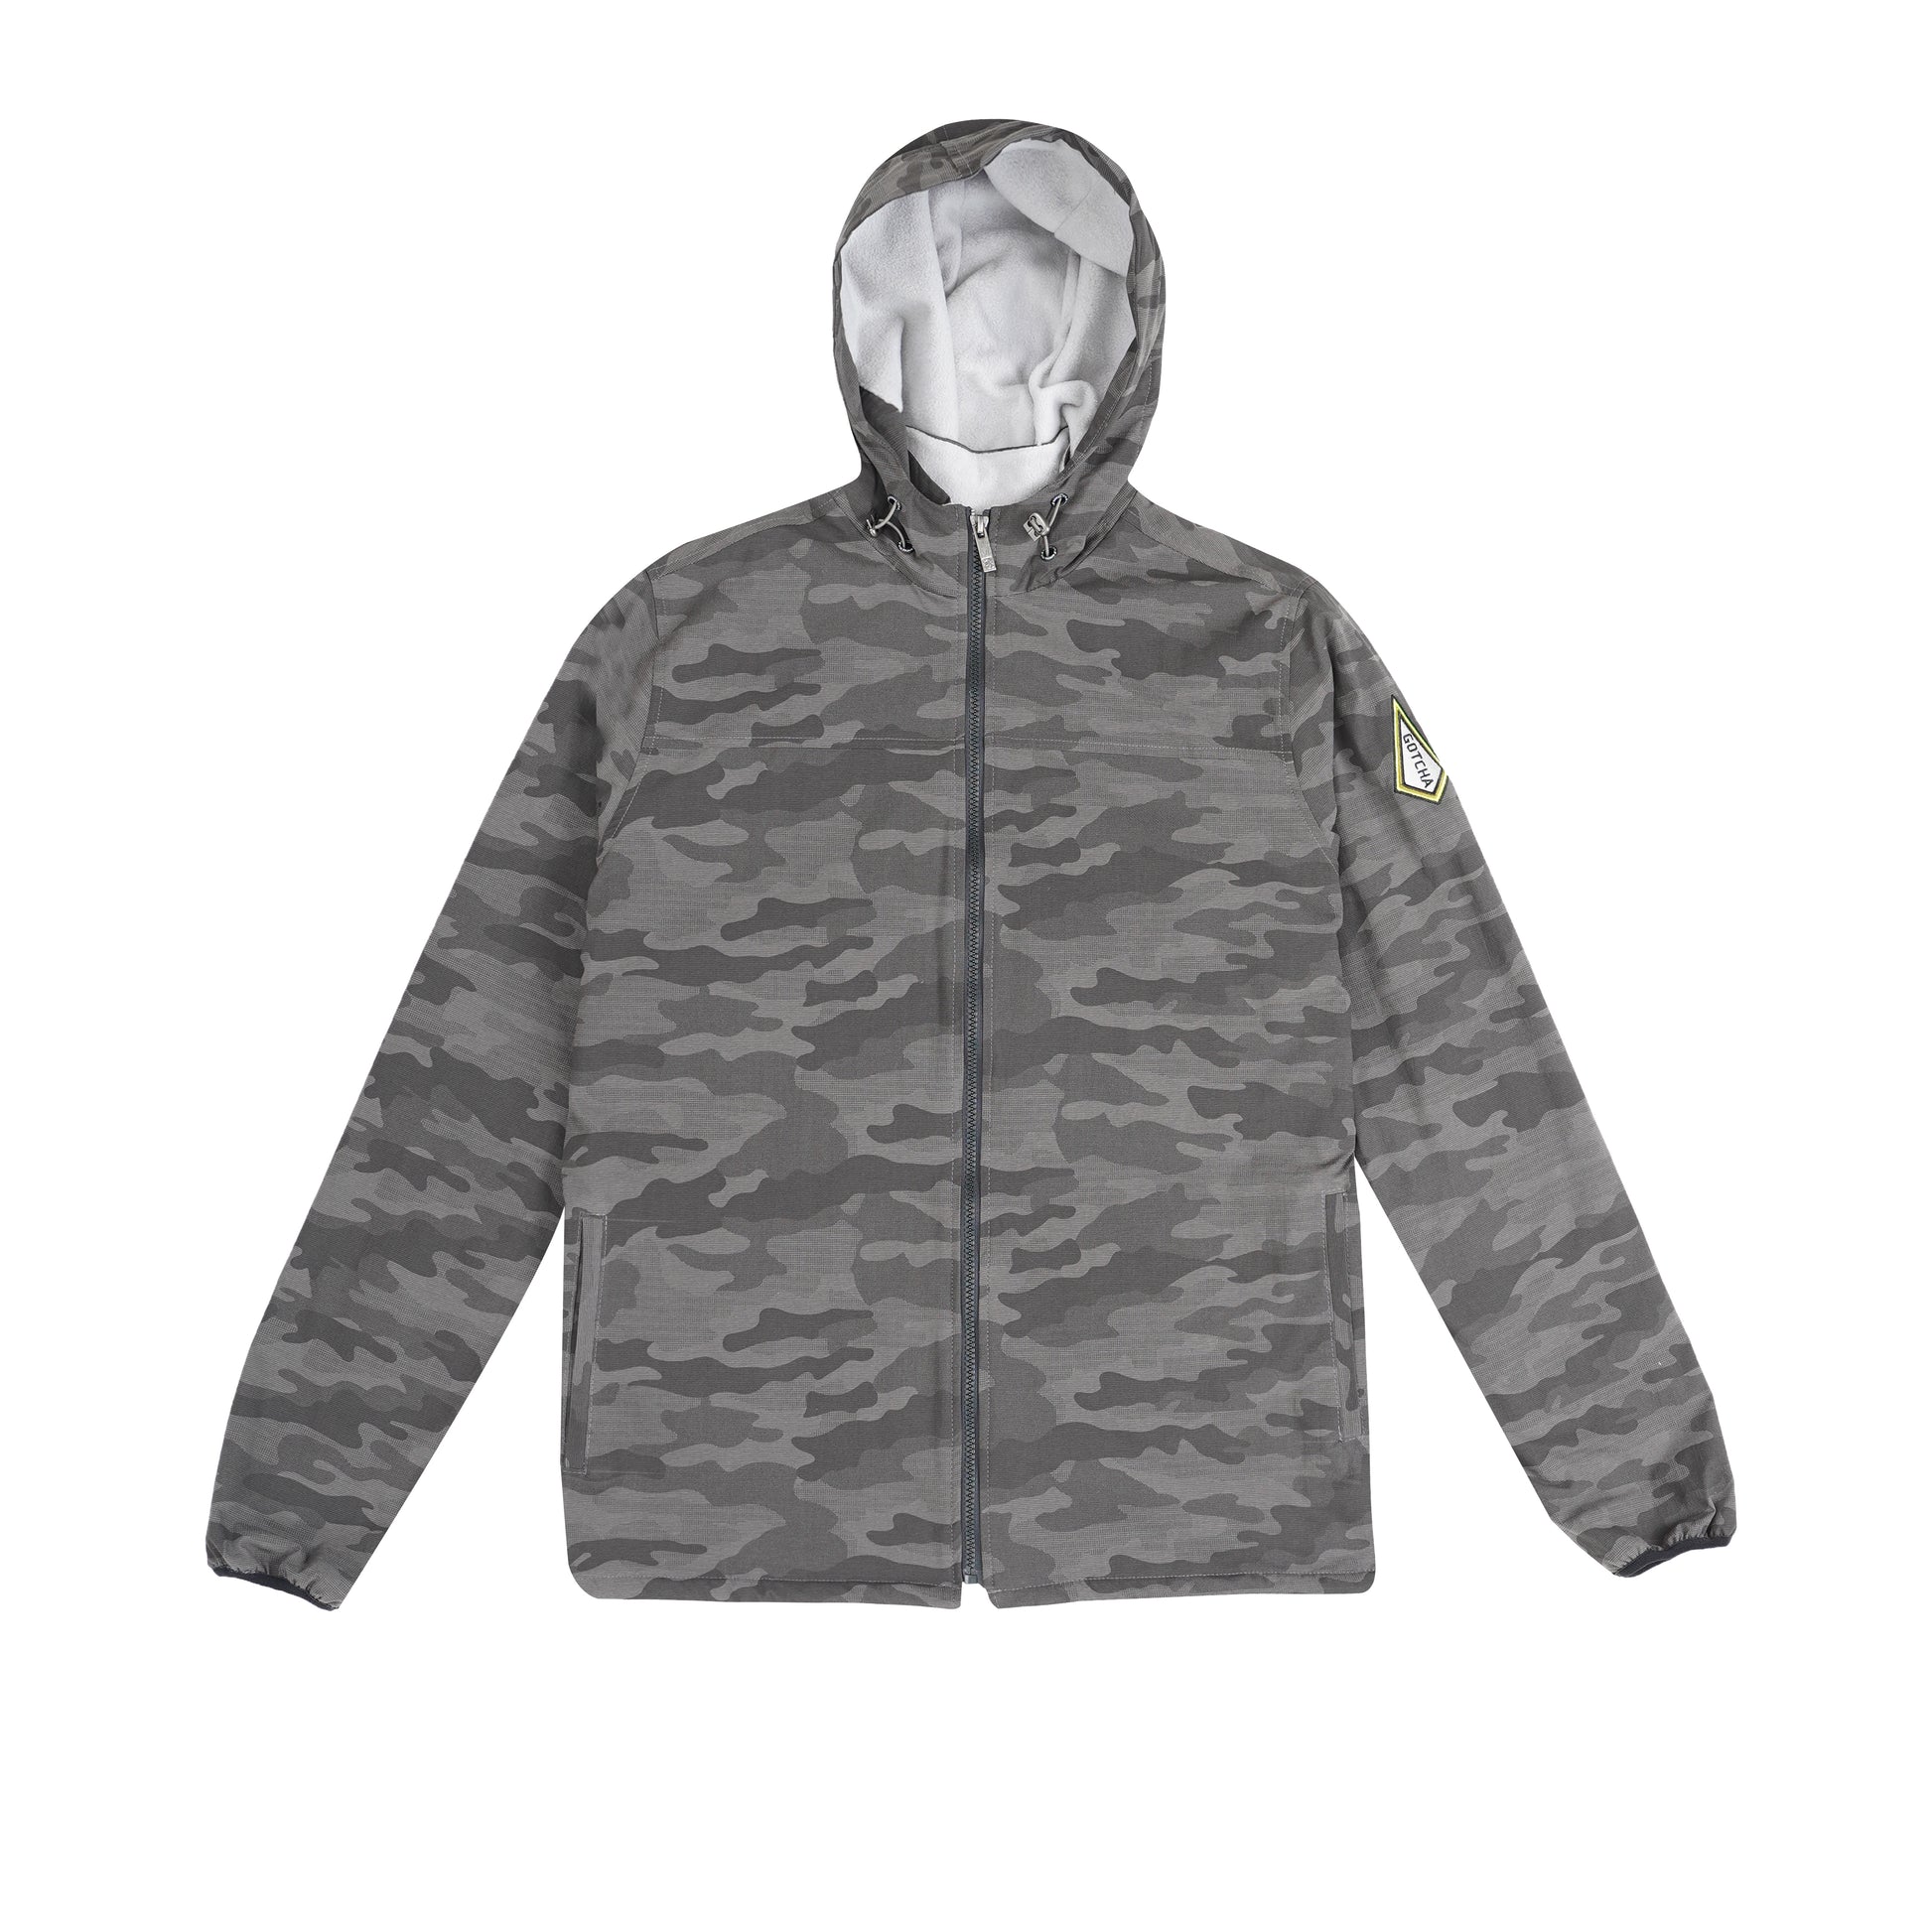 Buy Camouflage gray lined hooded jacket in dubai